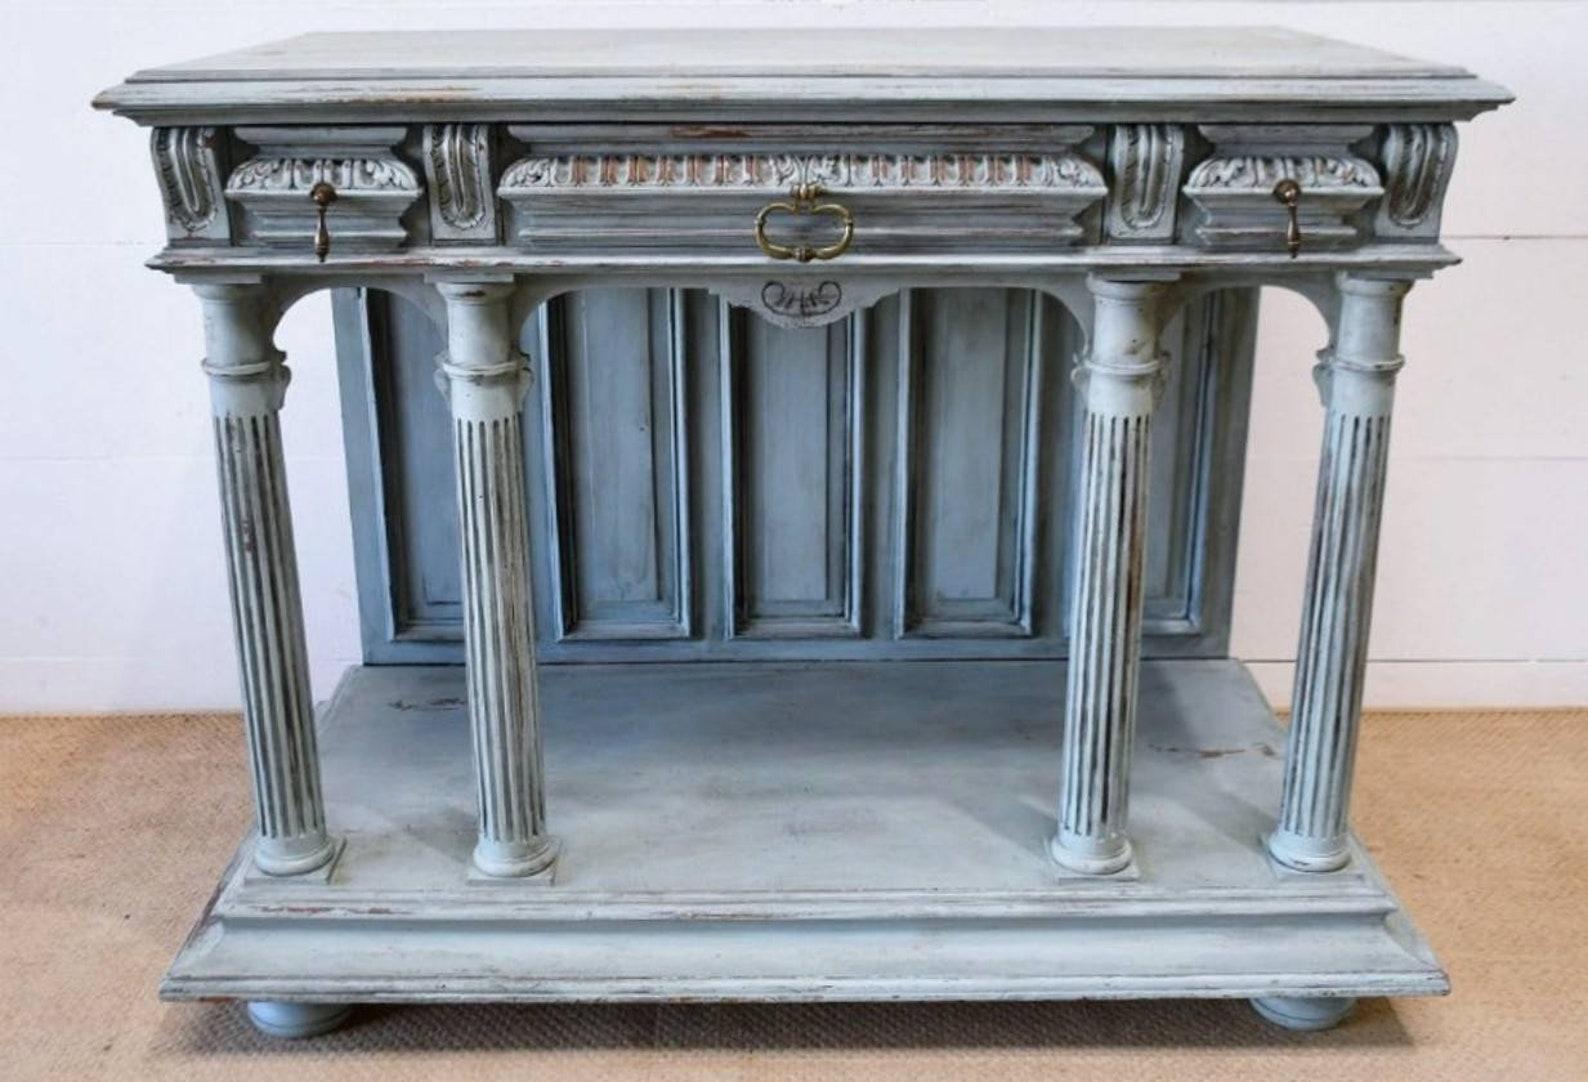 French Perfection!! A most impressive Renaissance Revival Henry II style well carved solid walnut sideboard server from the second half of the 19th century, finished in later chic distressed dusty blue painted finish with light airy hues of chalky